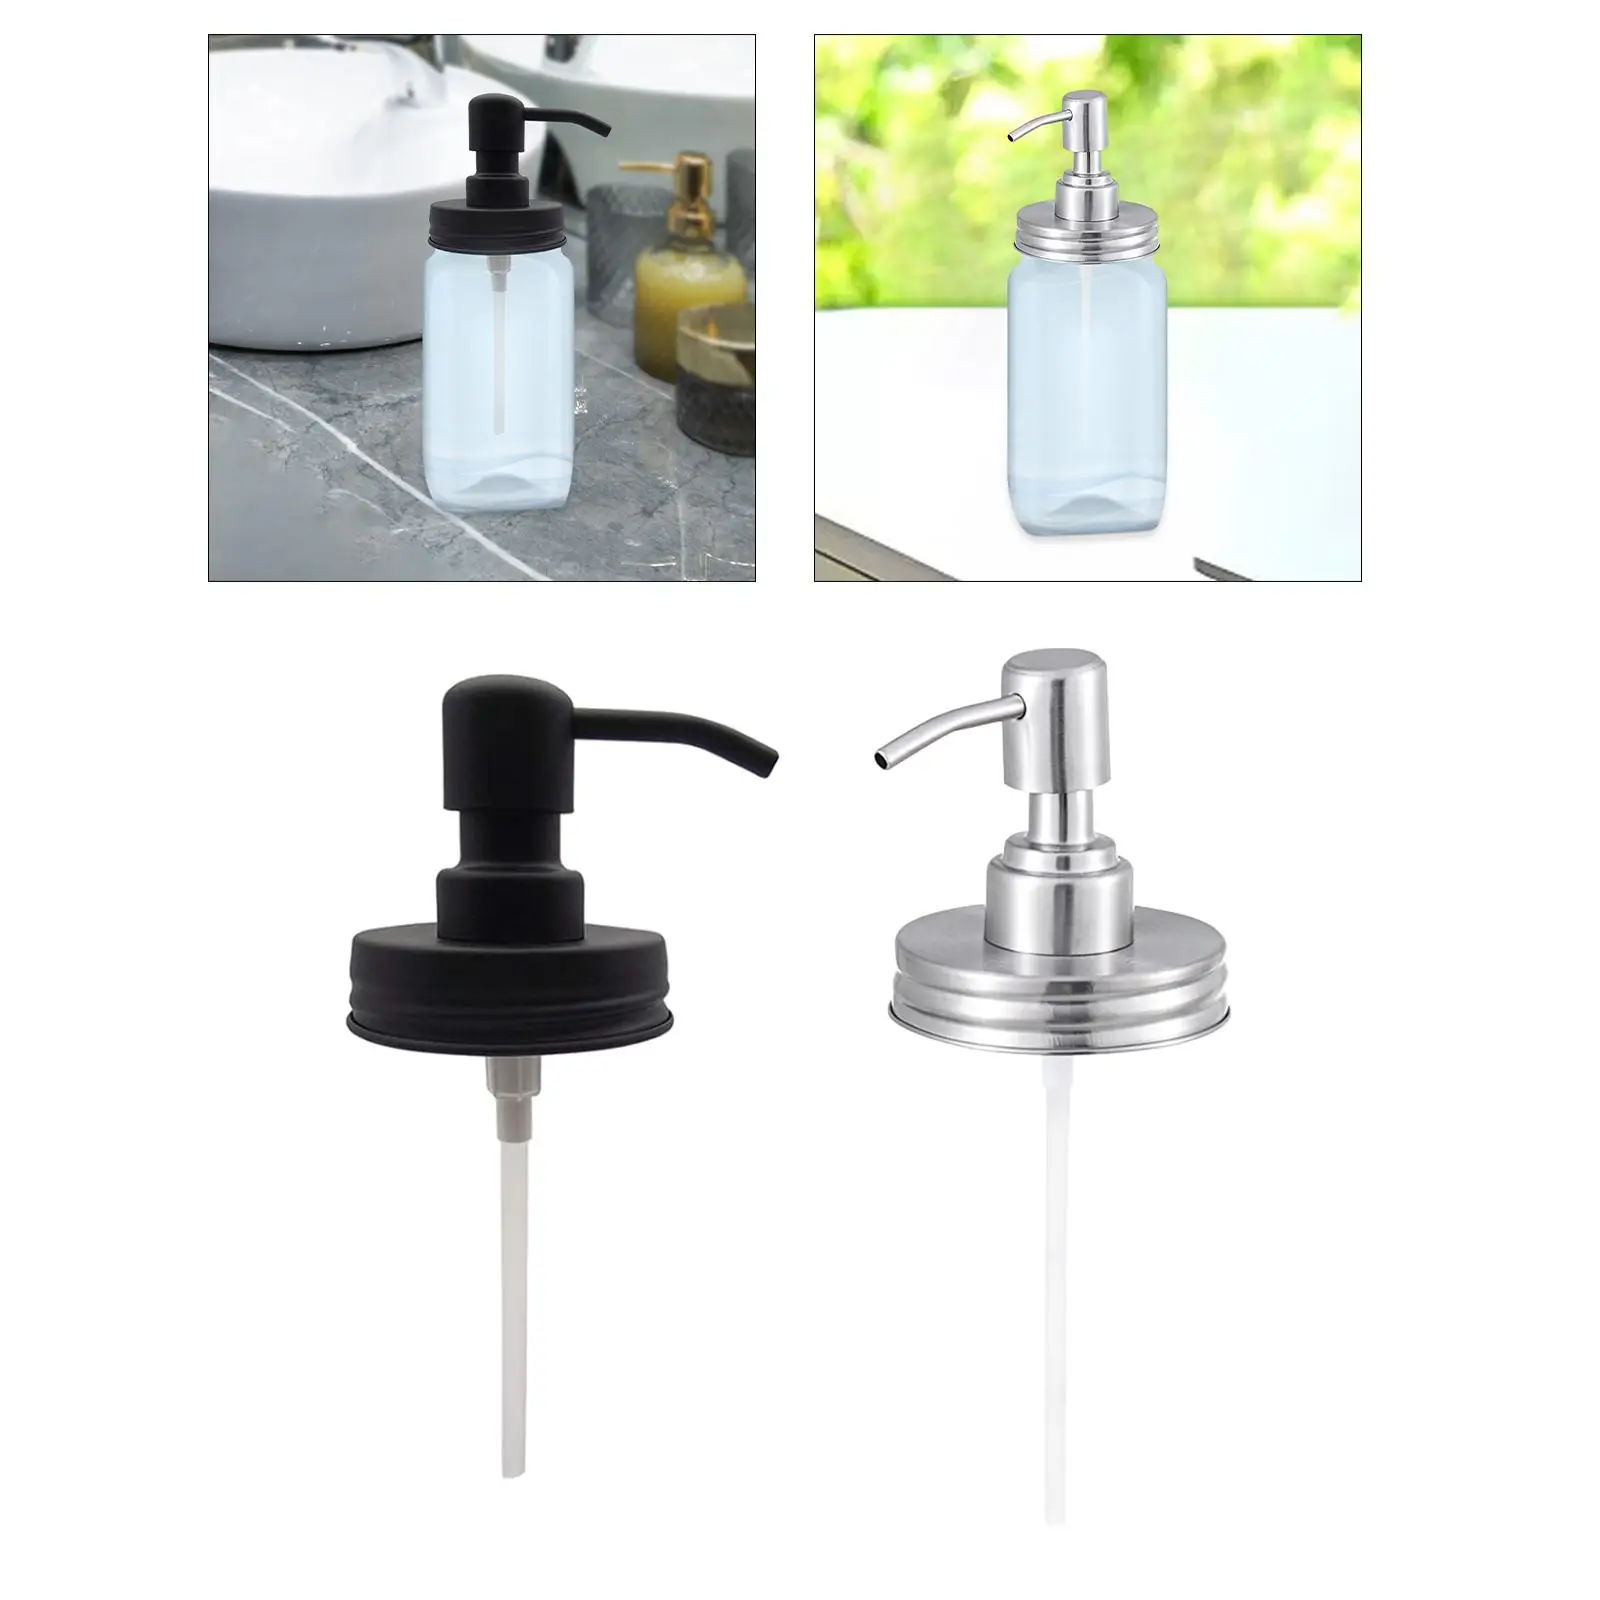 Stainless Steel, Soap Pump Nozzle Head, Lotion Dispenser Pump Head, for Kitchen Sink Bathroom Countertop Parts Accessories